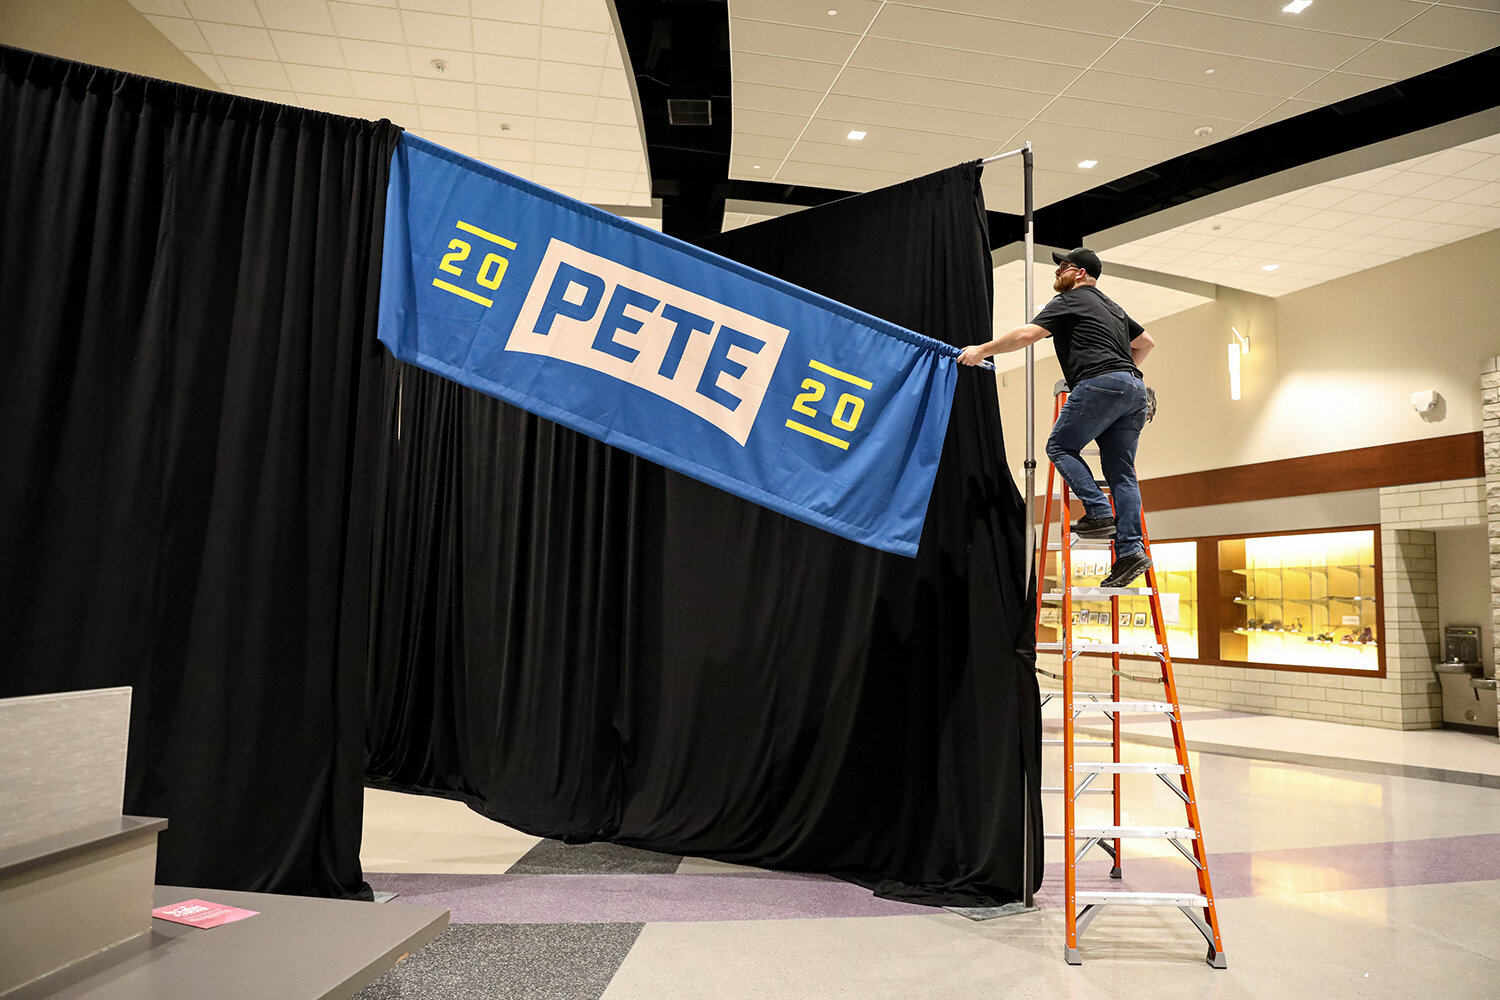  A worker takes down a sign Democratic presidential candidate Pete Buttigieg after a campaign rally at Liberty High School in North Liberty, IA on Monday, Jan. 27, 2020. 